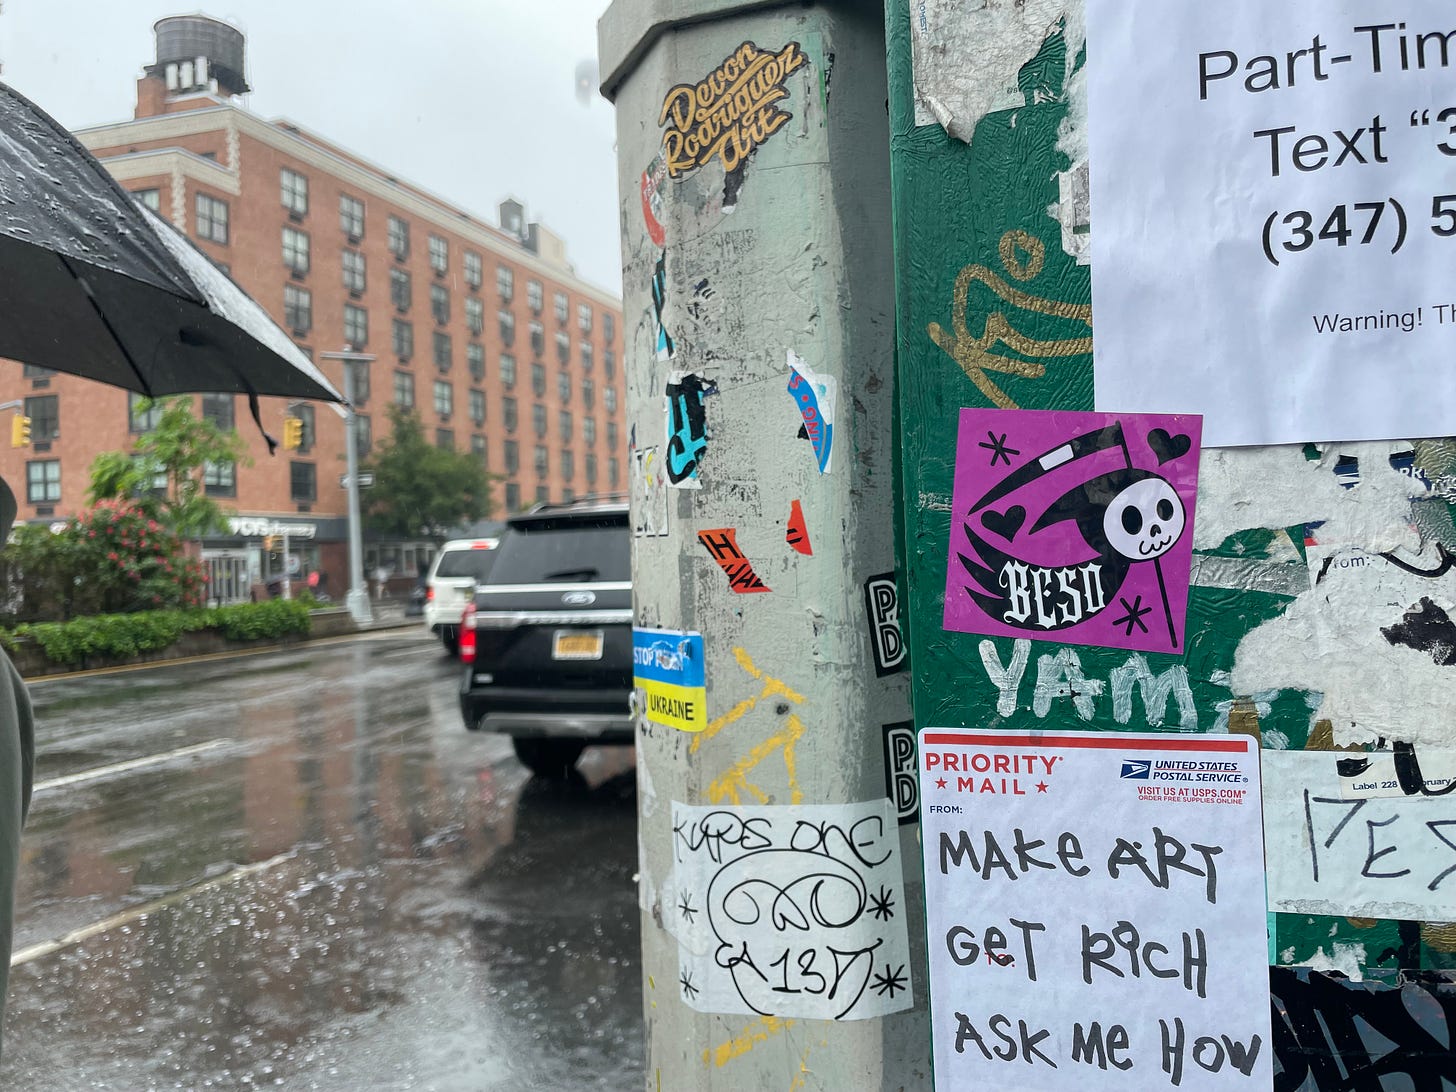 A label stuck to a telephone pole says in all-caps, printed with a Sharpie, “Make Art/Get Rich/Ask Me How”.